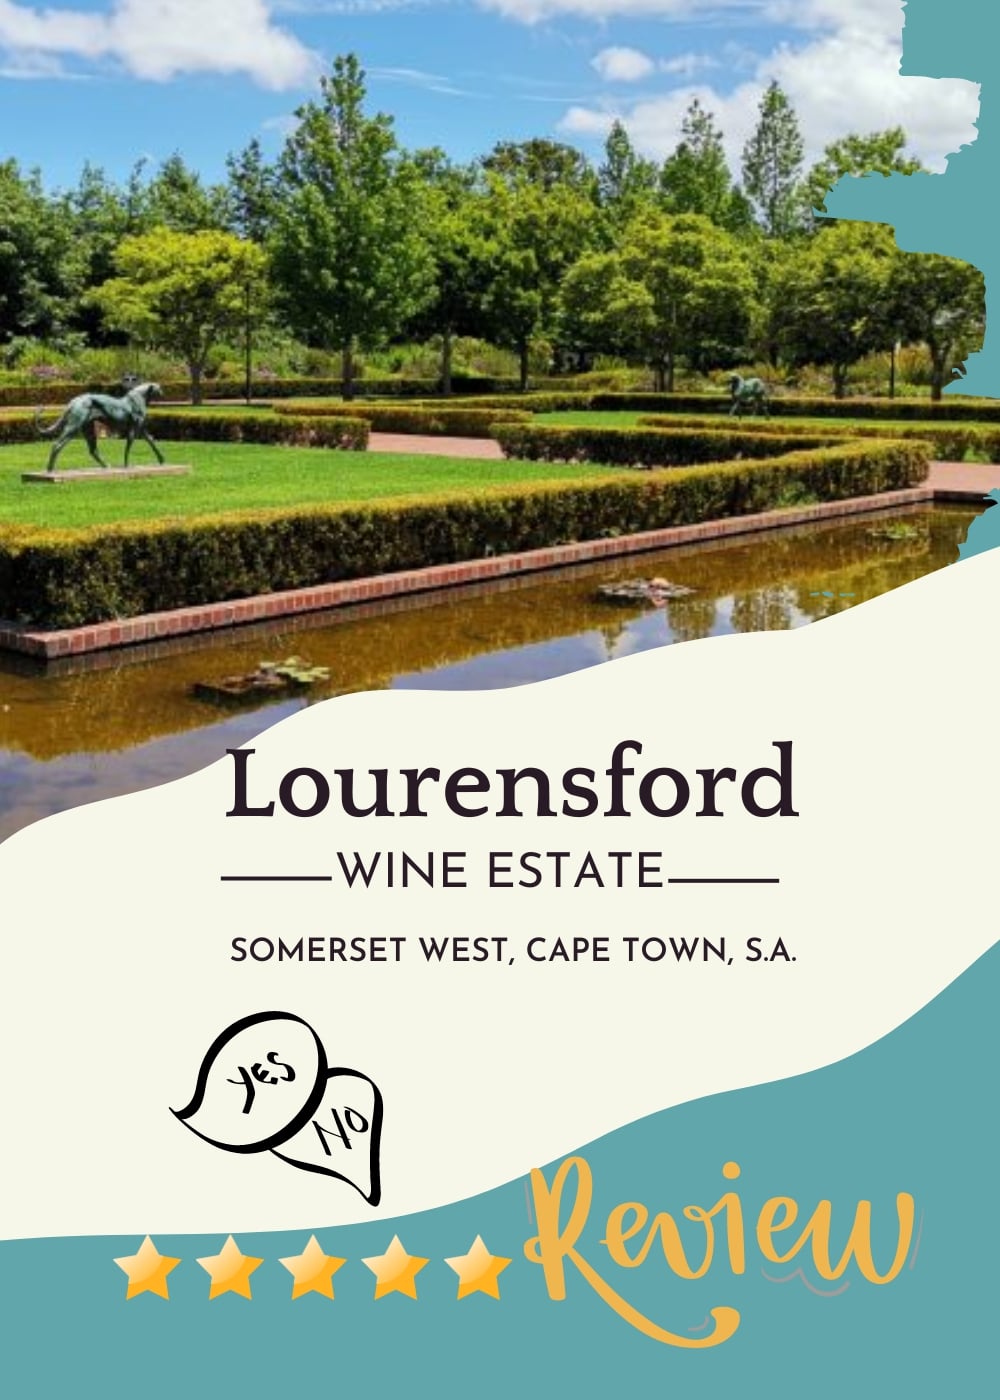 Review of Lourensford wine estate in somerset west cape town best wine estates in cape town min